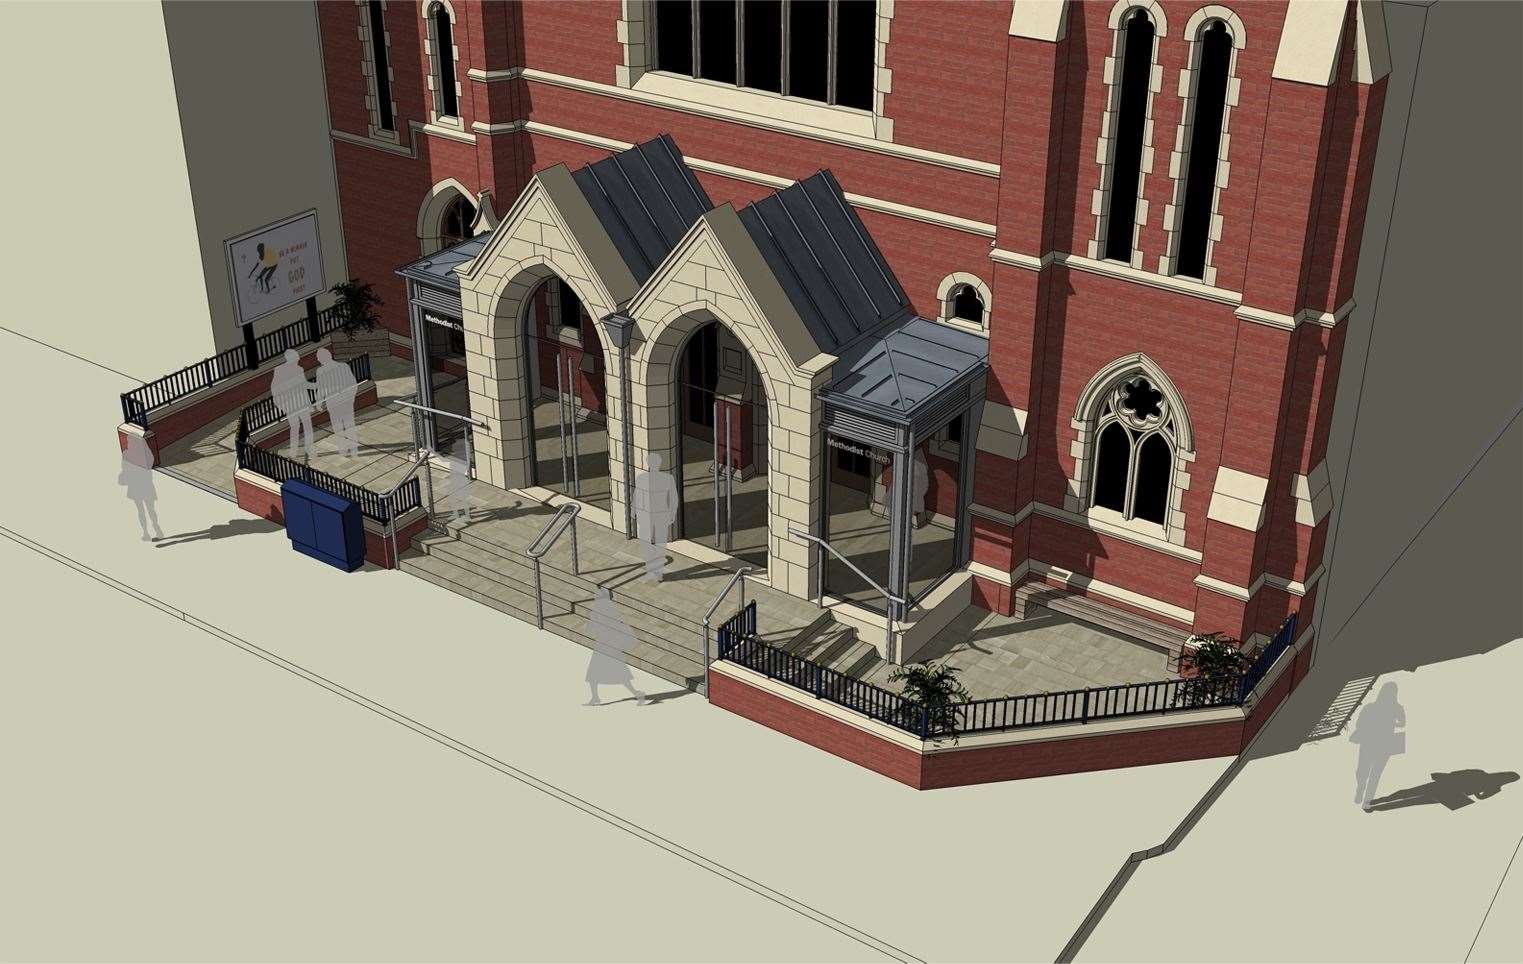 Works are set to begin soon at Gravesend Methodist Church. Picture: Gravesend Methodist Church (15115055)